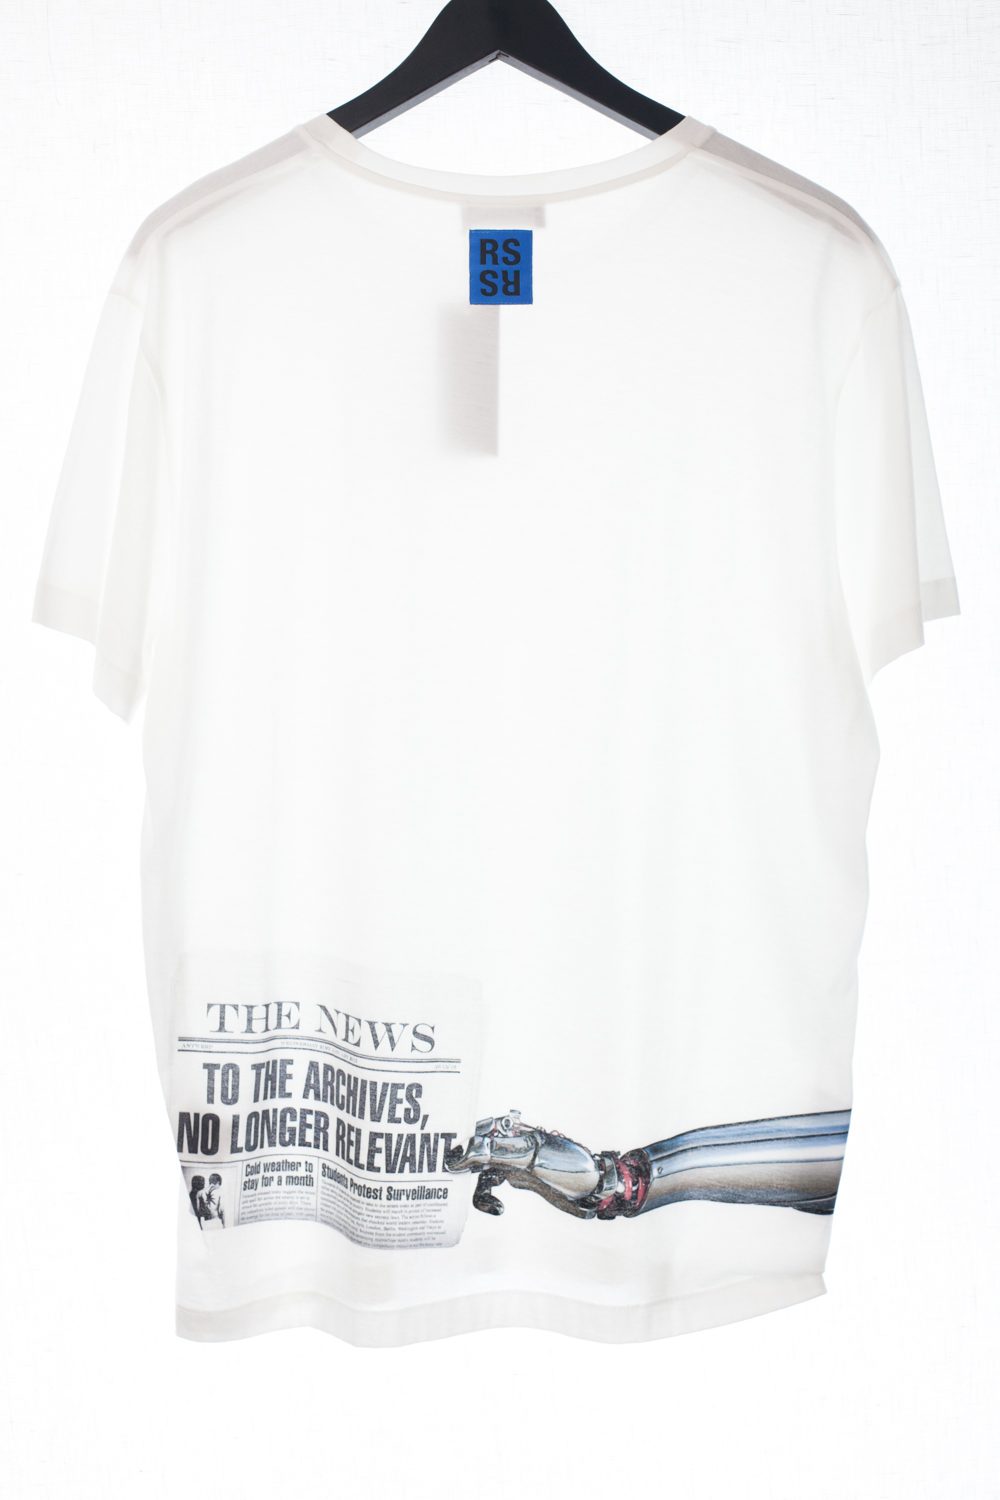 FW15 “To The Archives” Drape Shirt